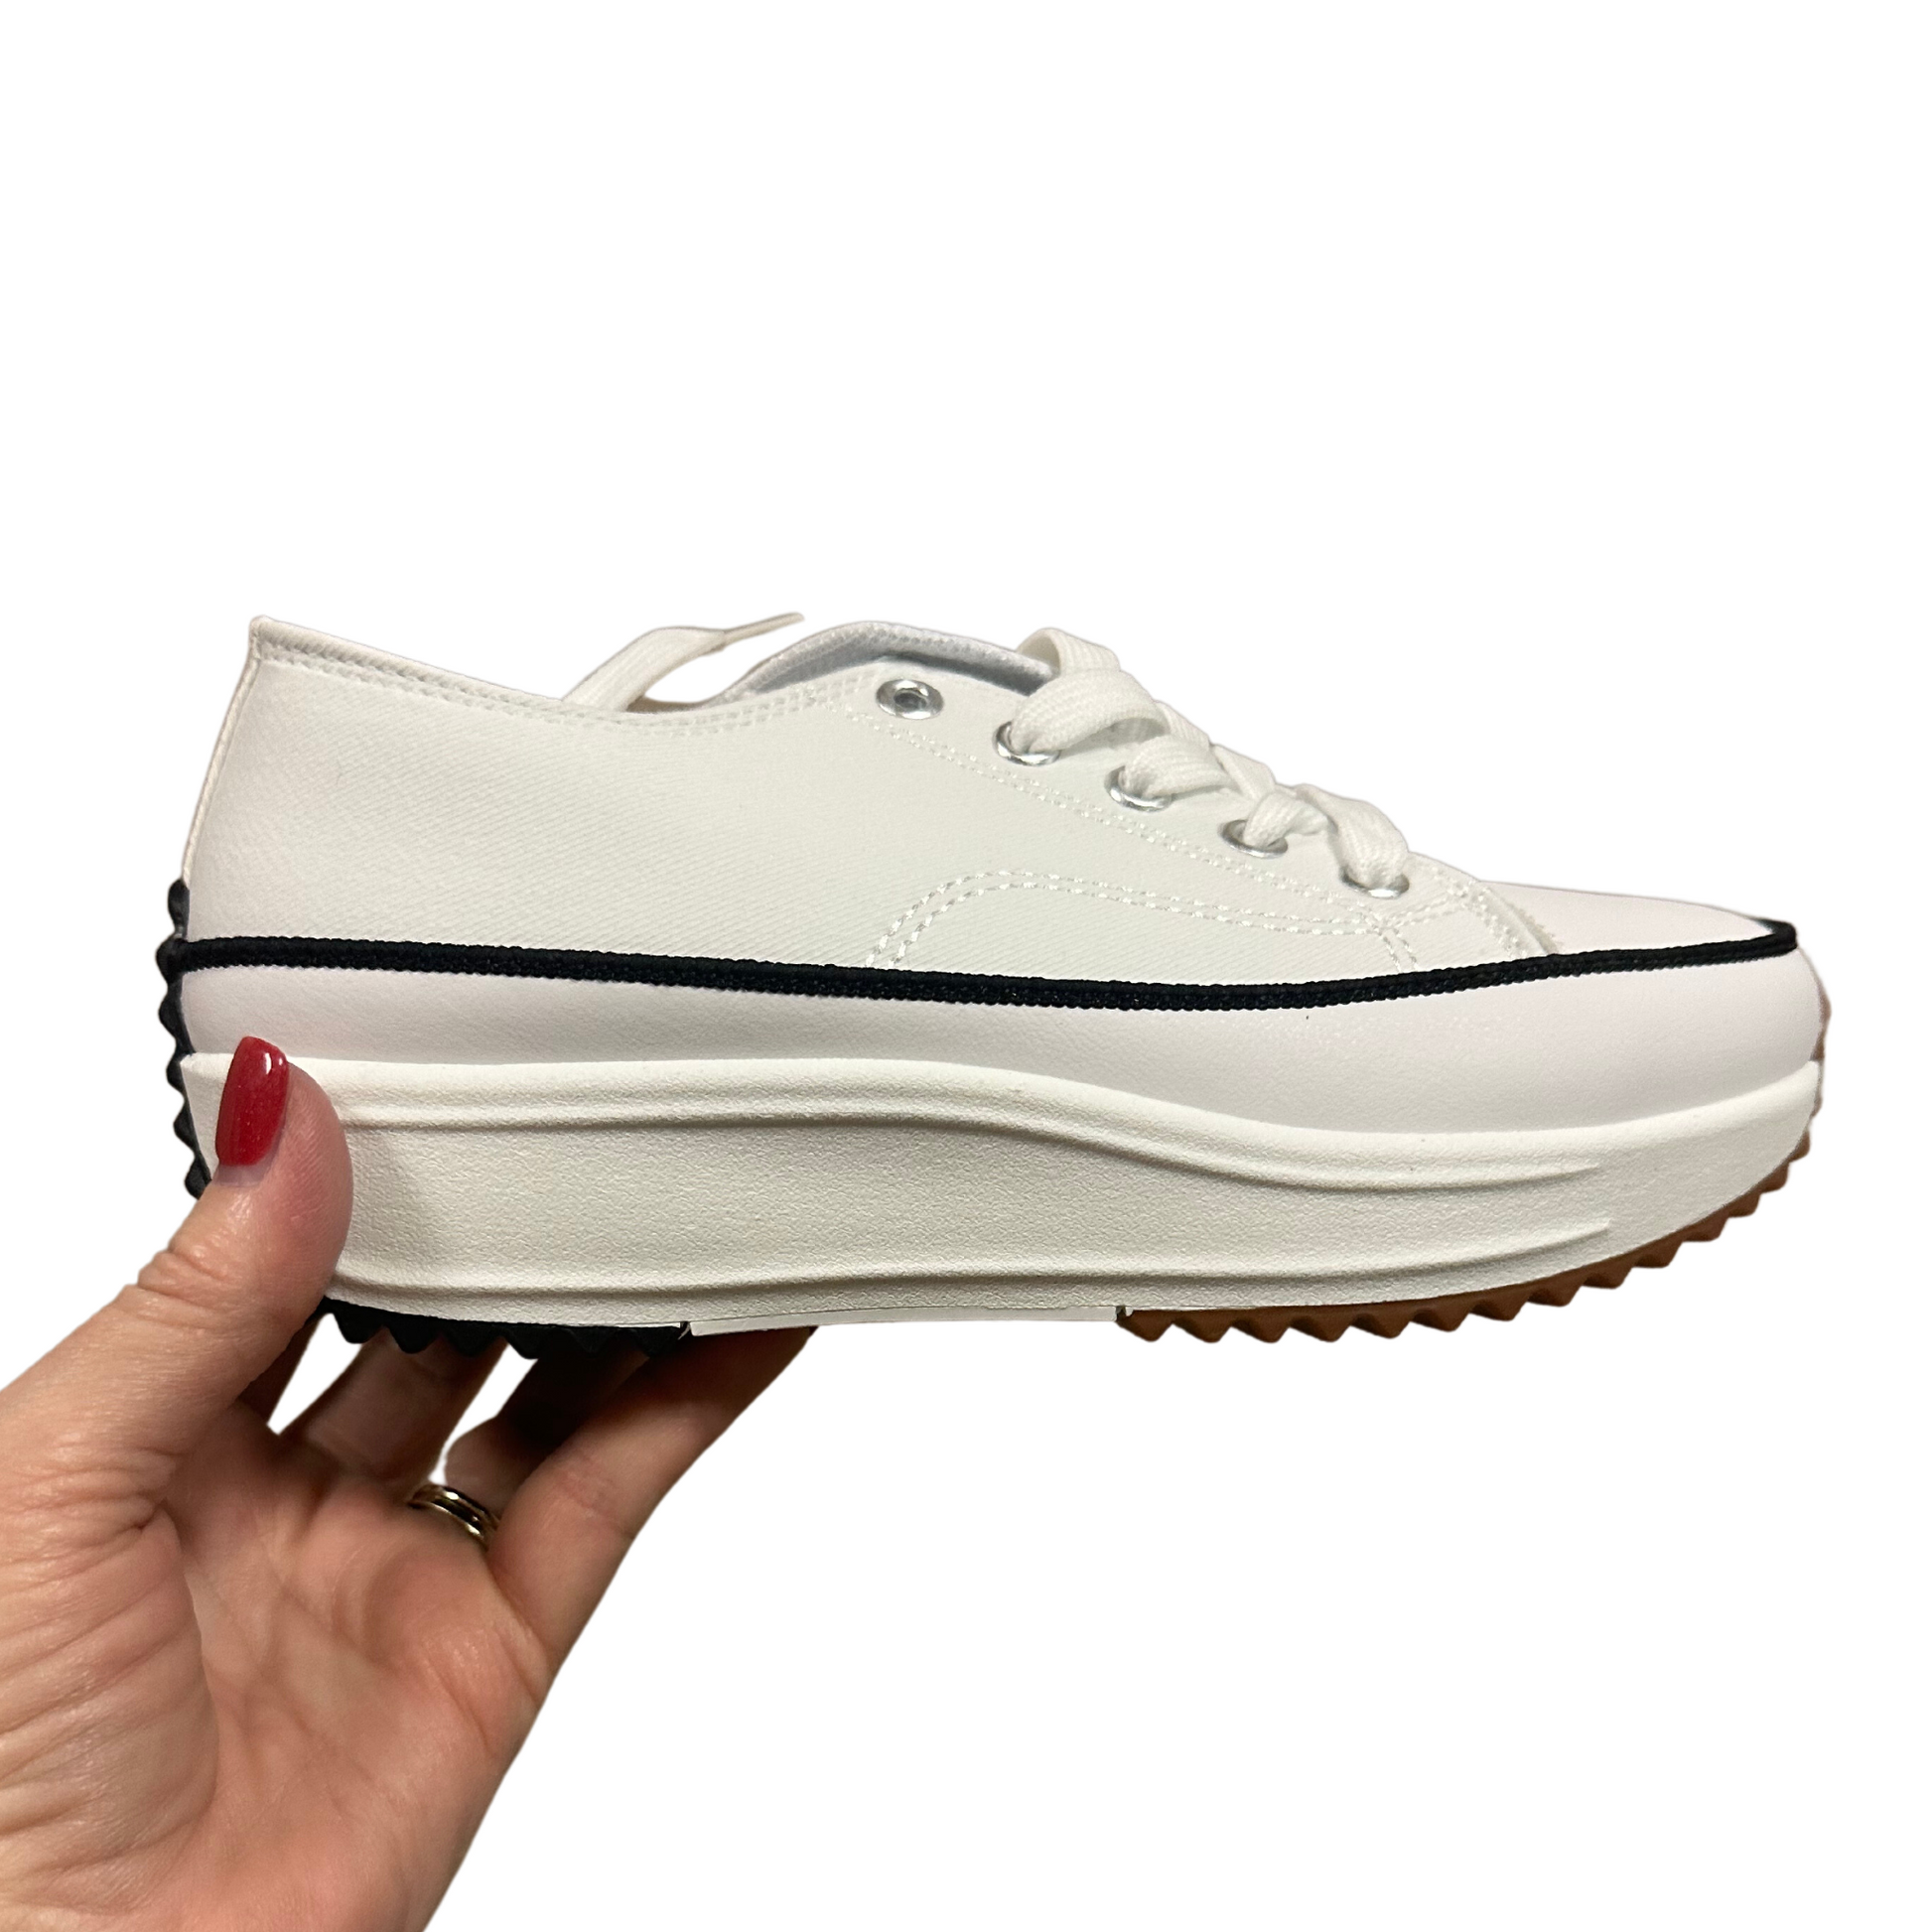 Lace up women's sneakers in white